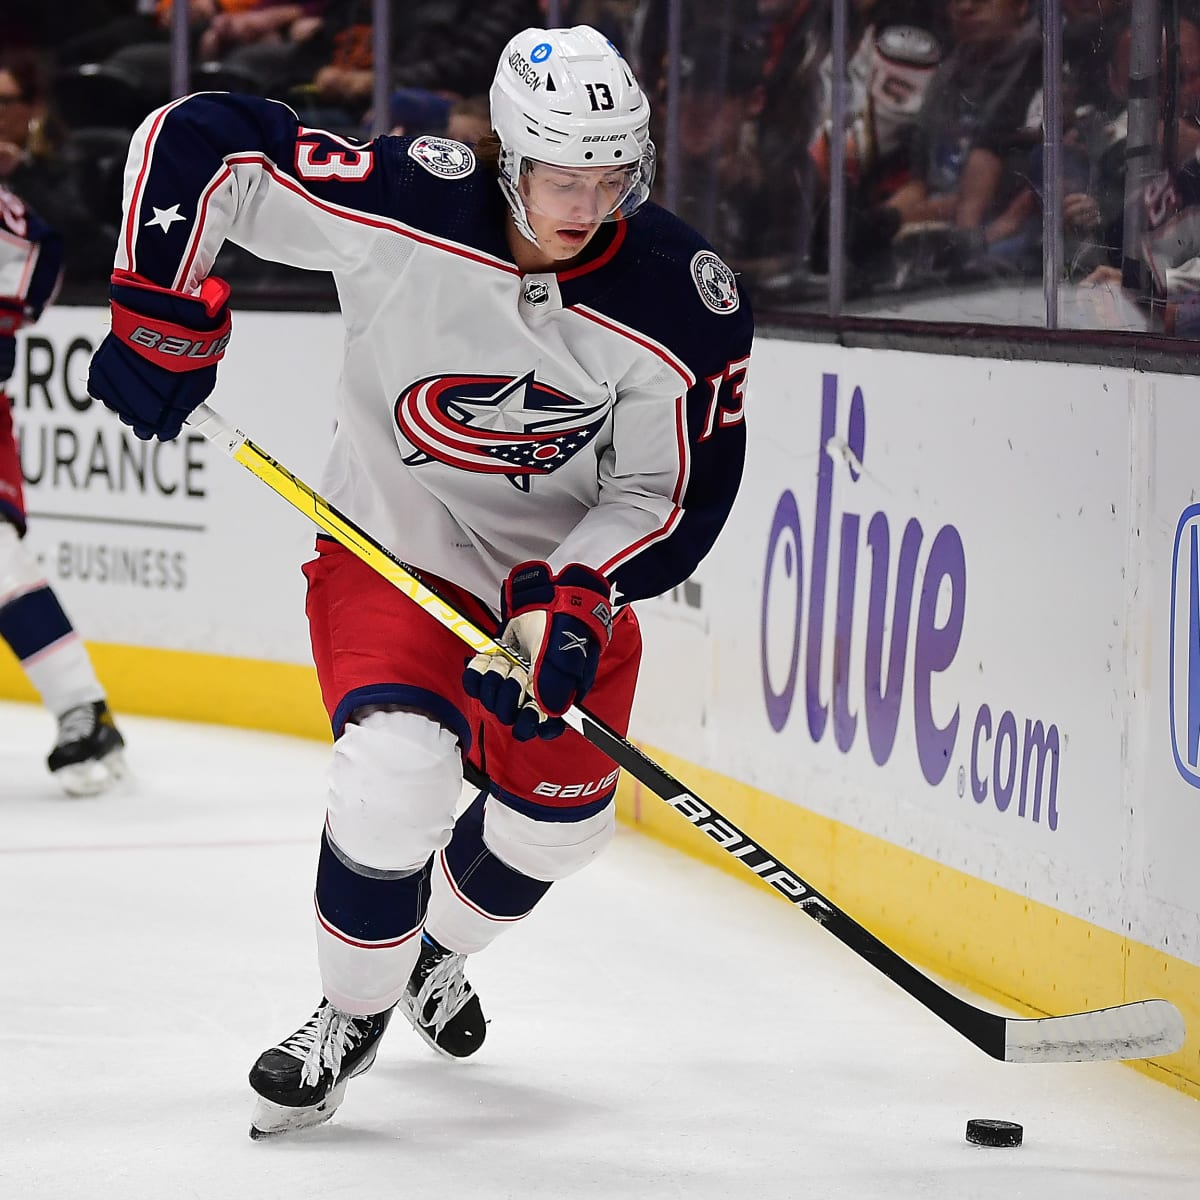 Johnny Gaudreau paces Columbus Blue Jackets with five points